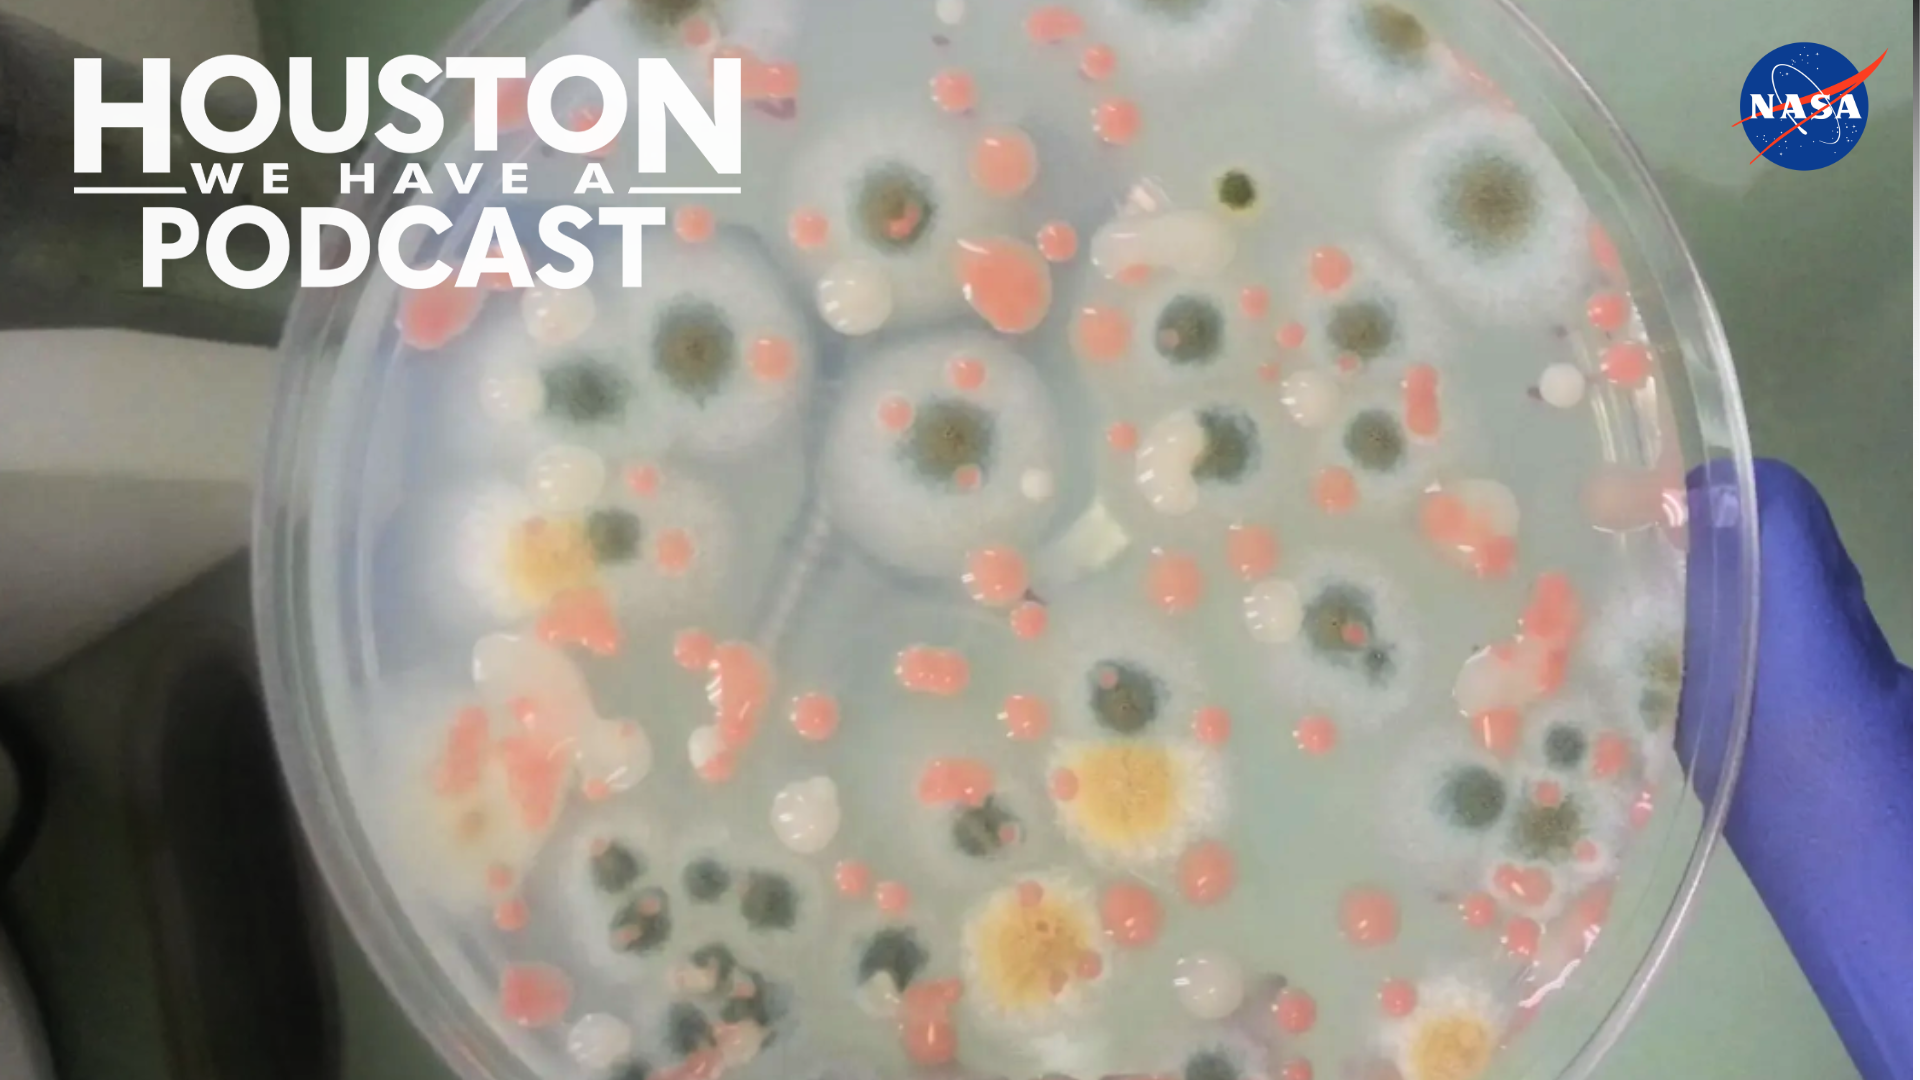 Houston We Have a Podcast Ep. 315: Space Biology